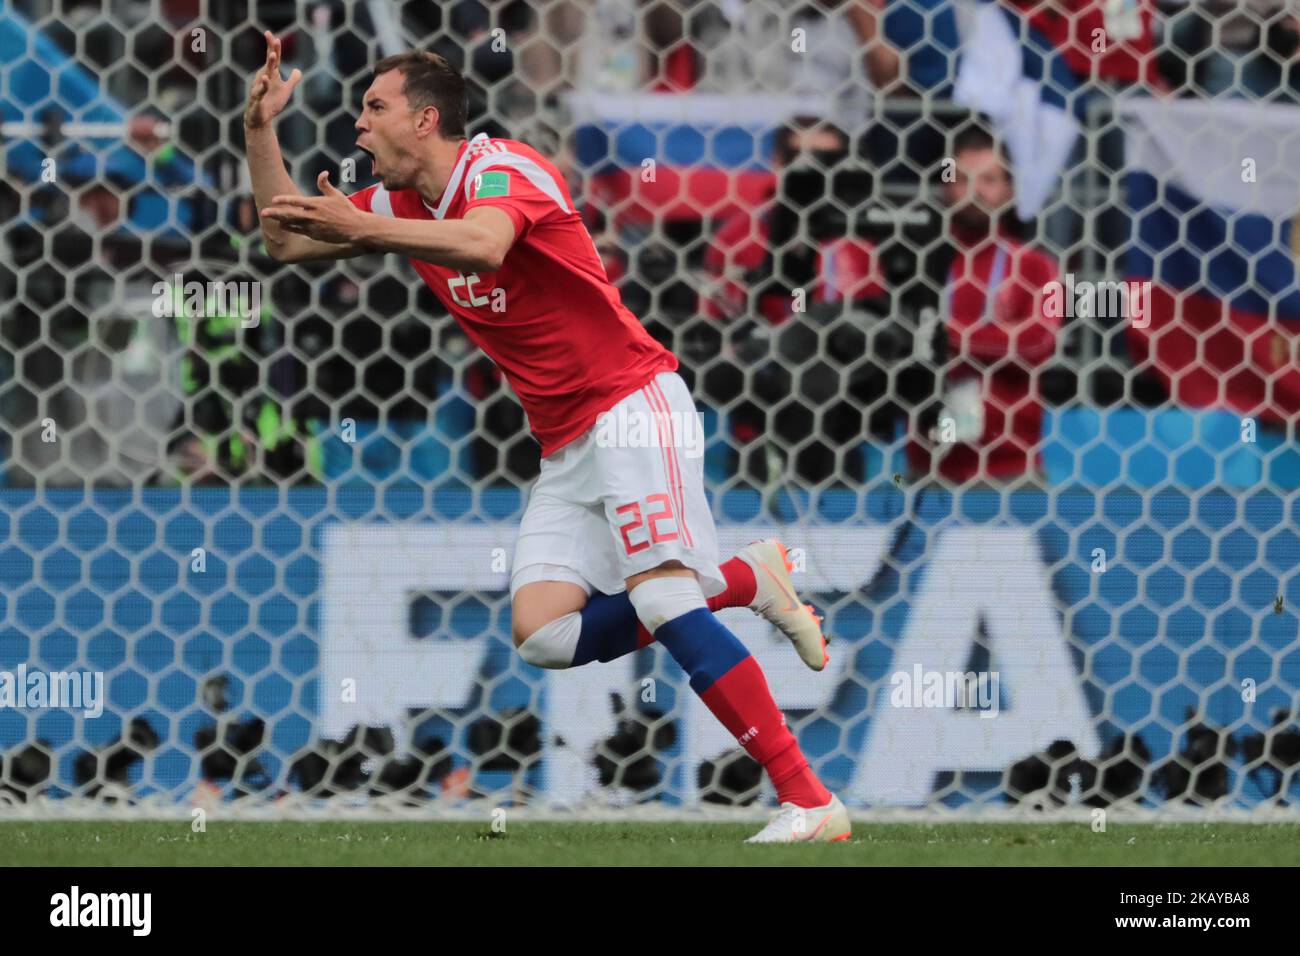 Artyom Dzyuba fo Russian National team during the group A match between Russia and Saudi Arabia at the 2018 soccer World Cup at Luzhniki stadium in Moscow, Russia, Tuesday, June 14, 2018. (Photo by Anatolij Medved/NurPhoto) Stock Photo